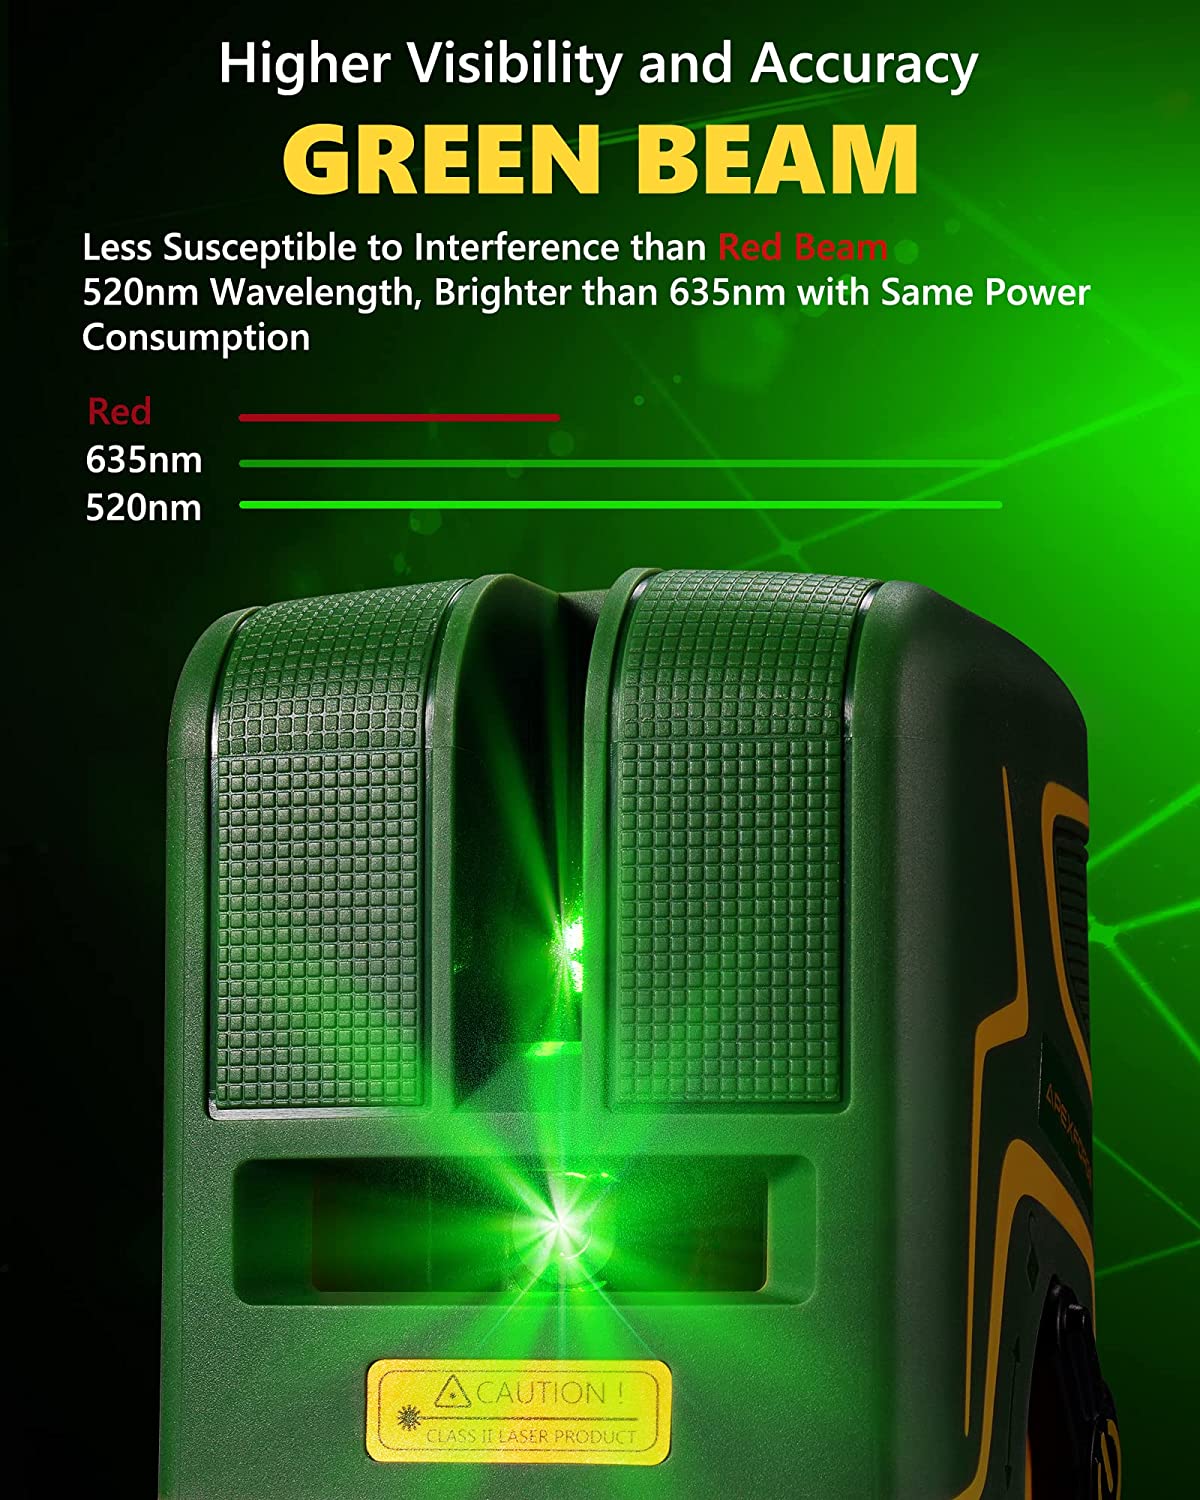 APEXFORGE X1C Cross Line Laser Level, with Rechargeable Battery, 100ft  Green Beam, Self-Leveling, Vertical and Horizontal Line, Pulse Mode, 360°  Magnetic Pivoting Base - Coupon Codes, Promo Codes, Daily Deals, Save Money